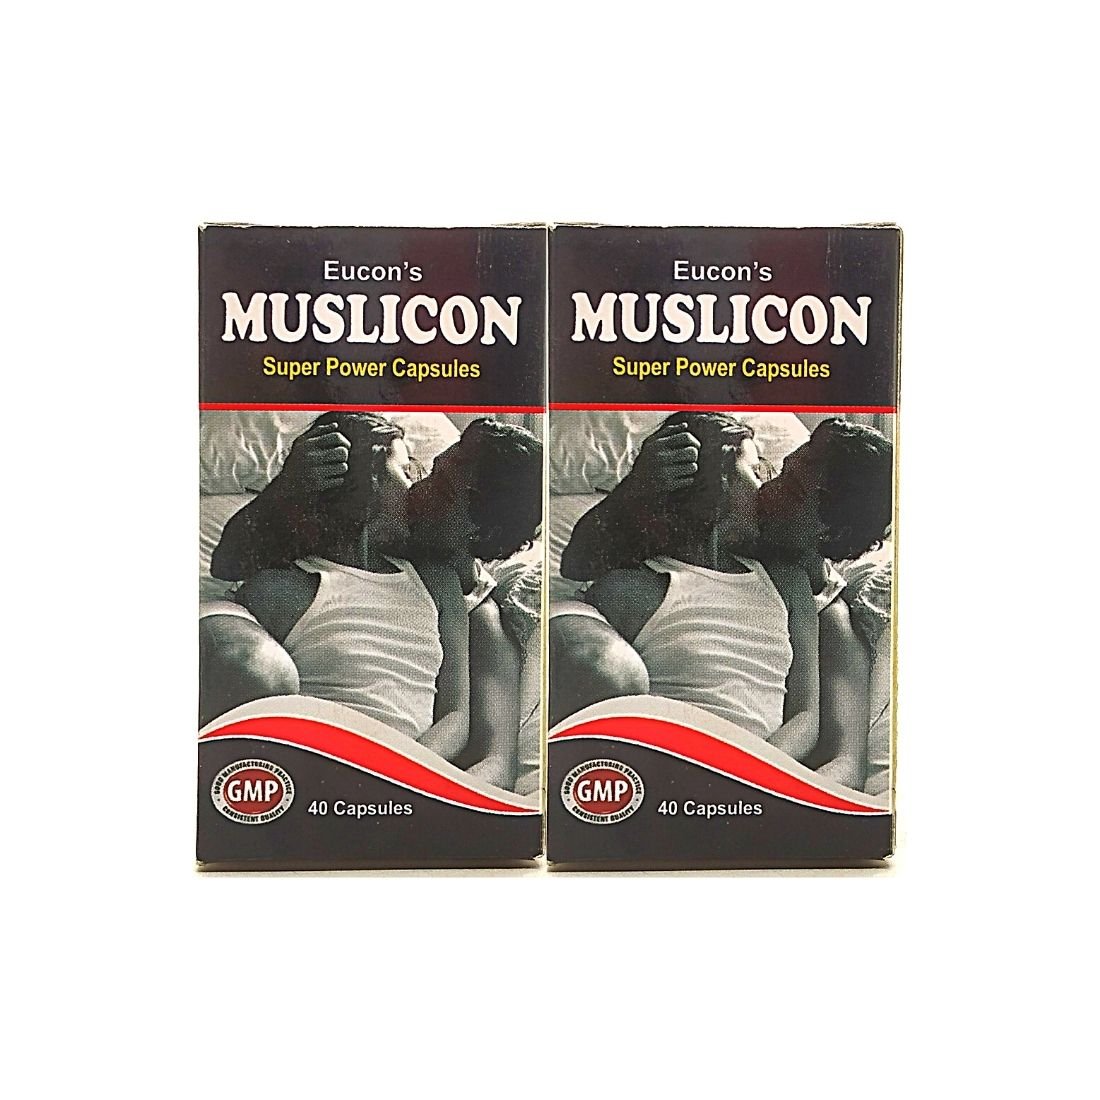 Muslicon super power Capsules helps erectile problems, increase stamina, increases libido,